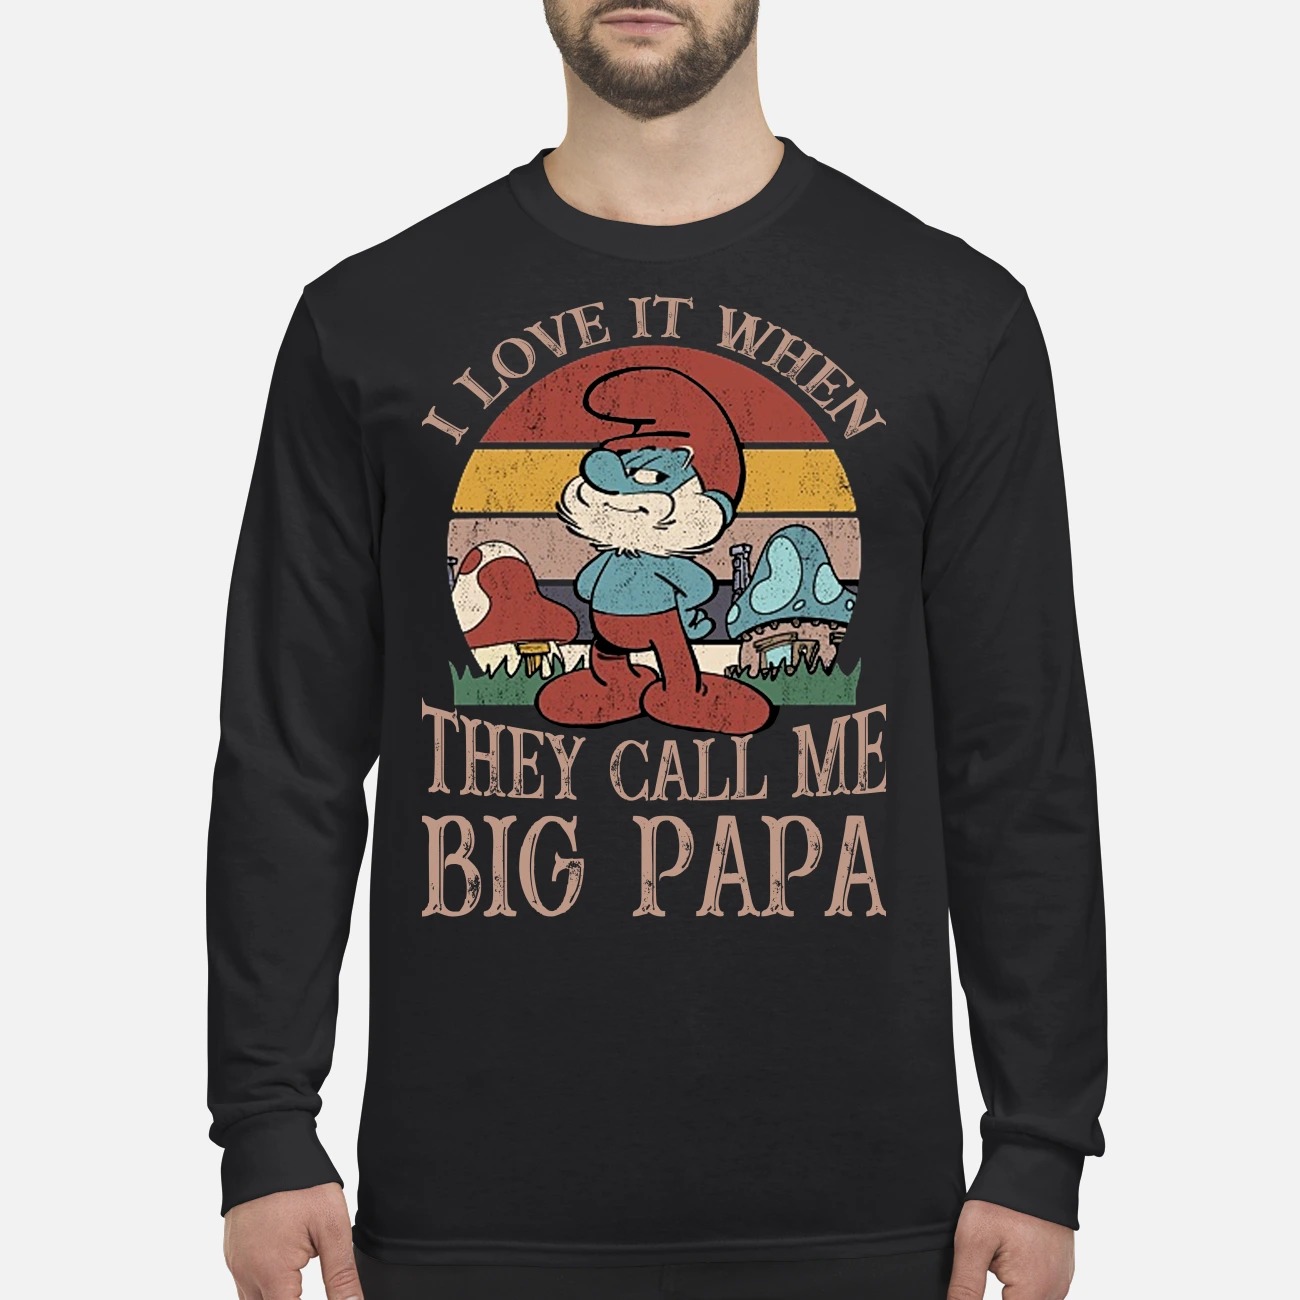 Smurf I love it when they call me big papa men's long sleeved shirt